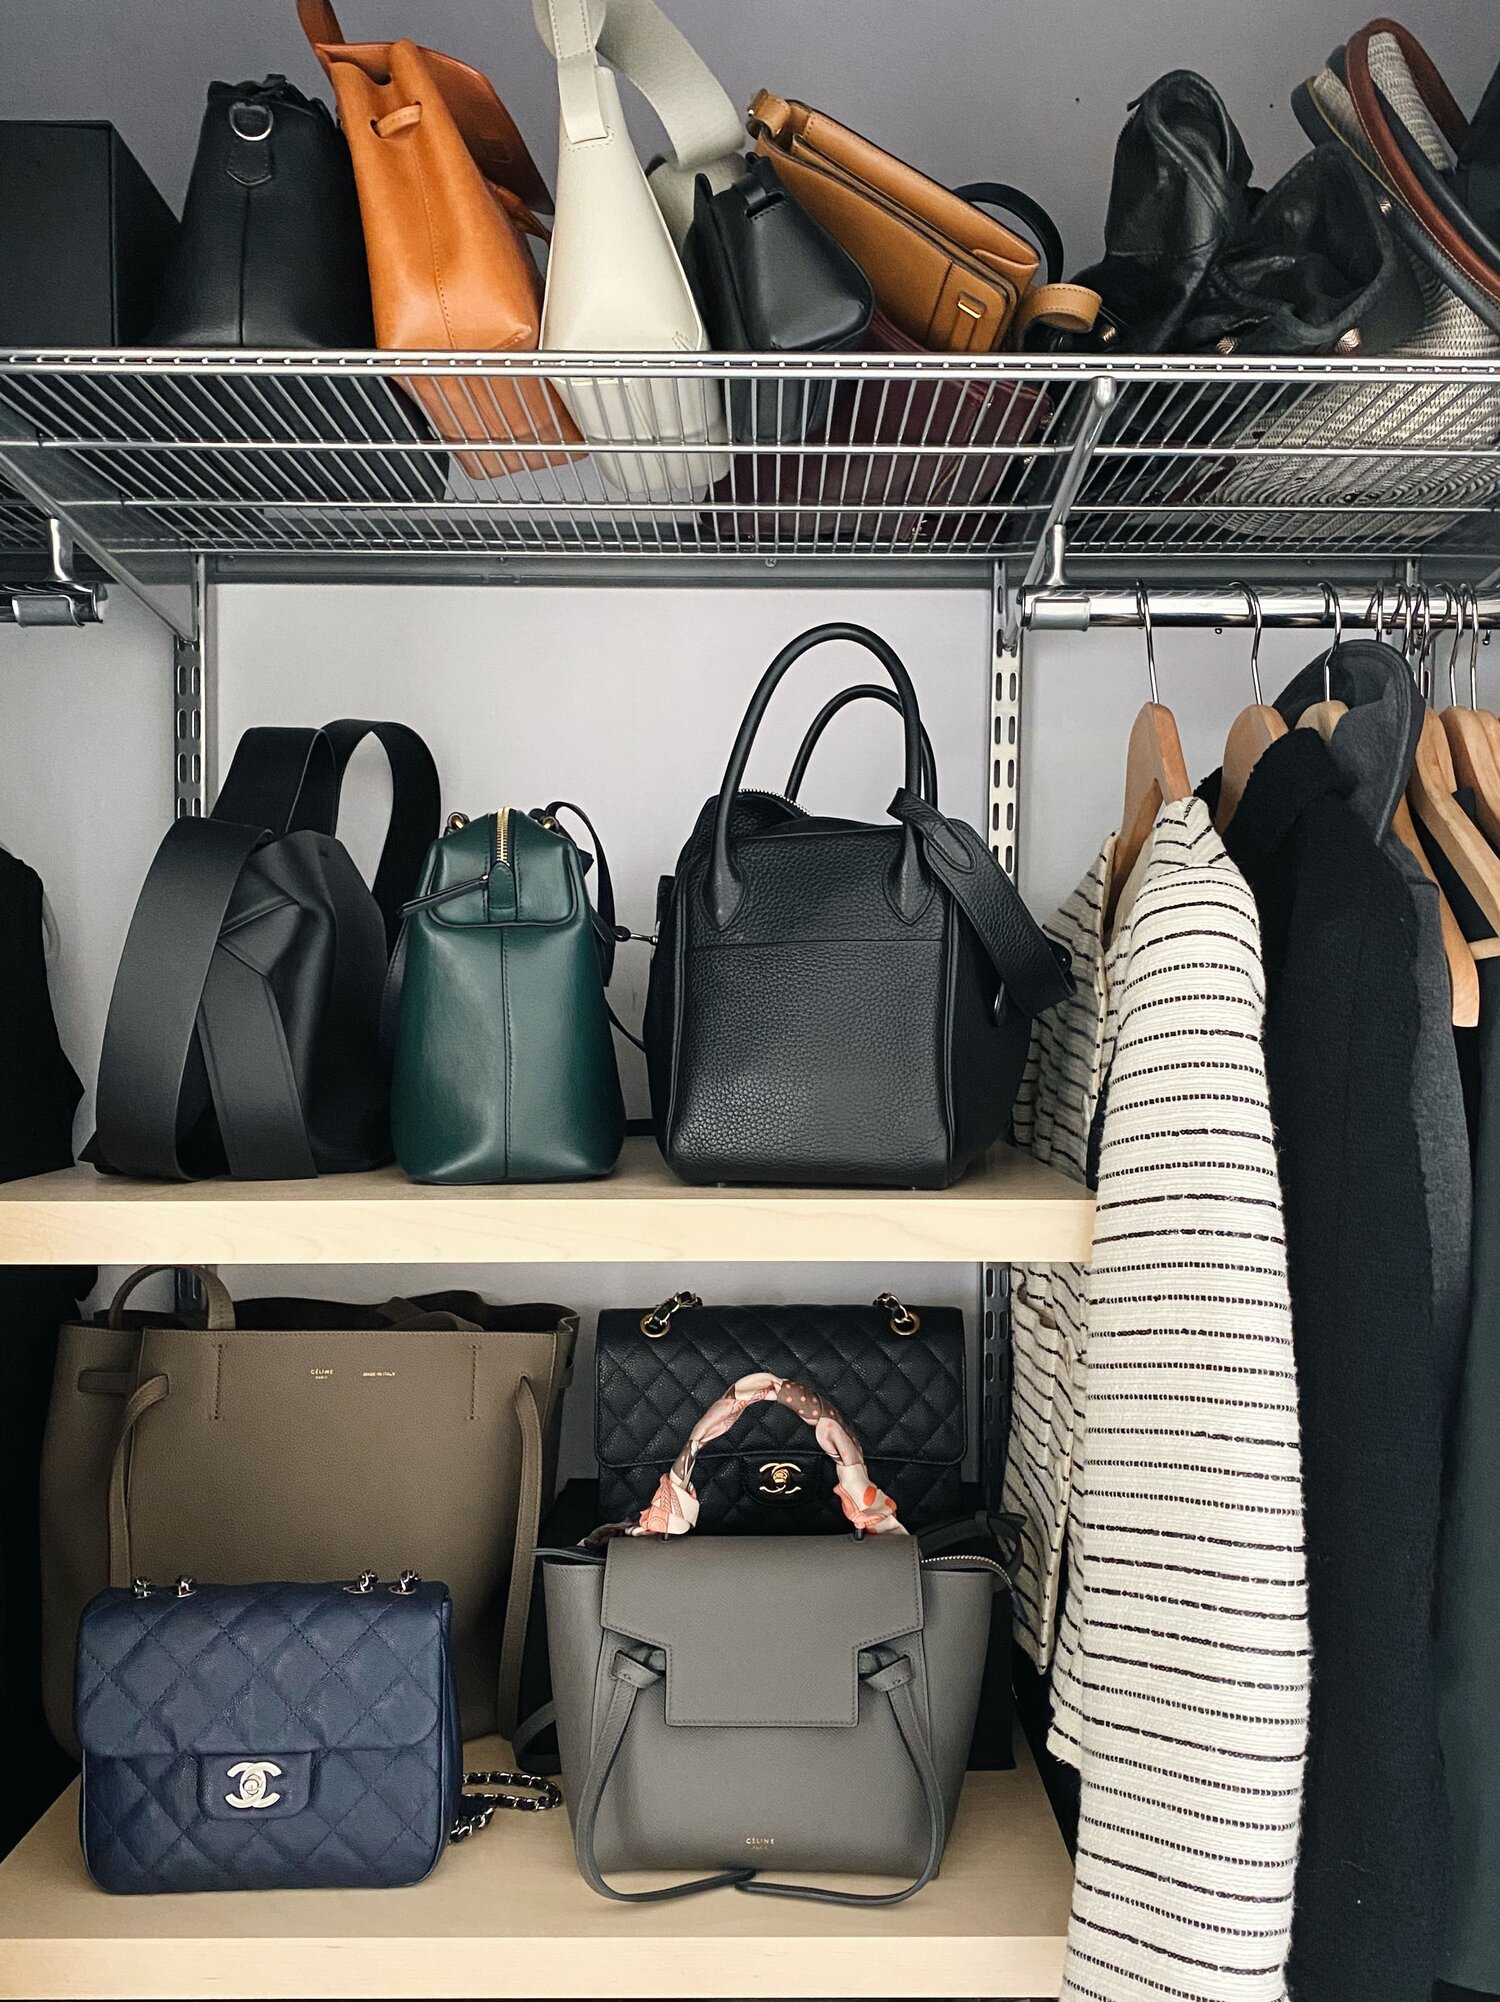 Have Your Handbag Carrying Habits Changed This Past Year? - PurseBlog